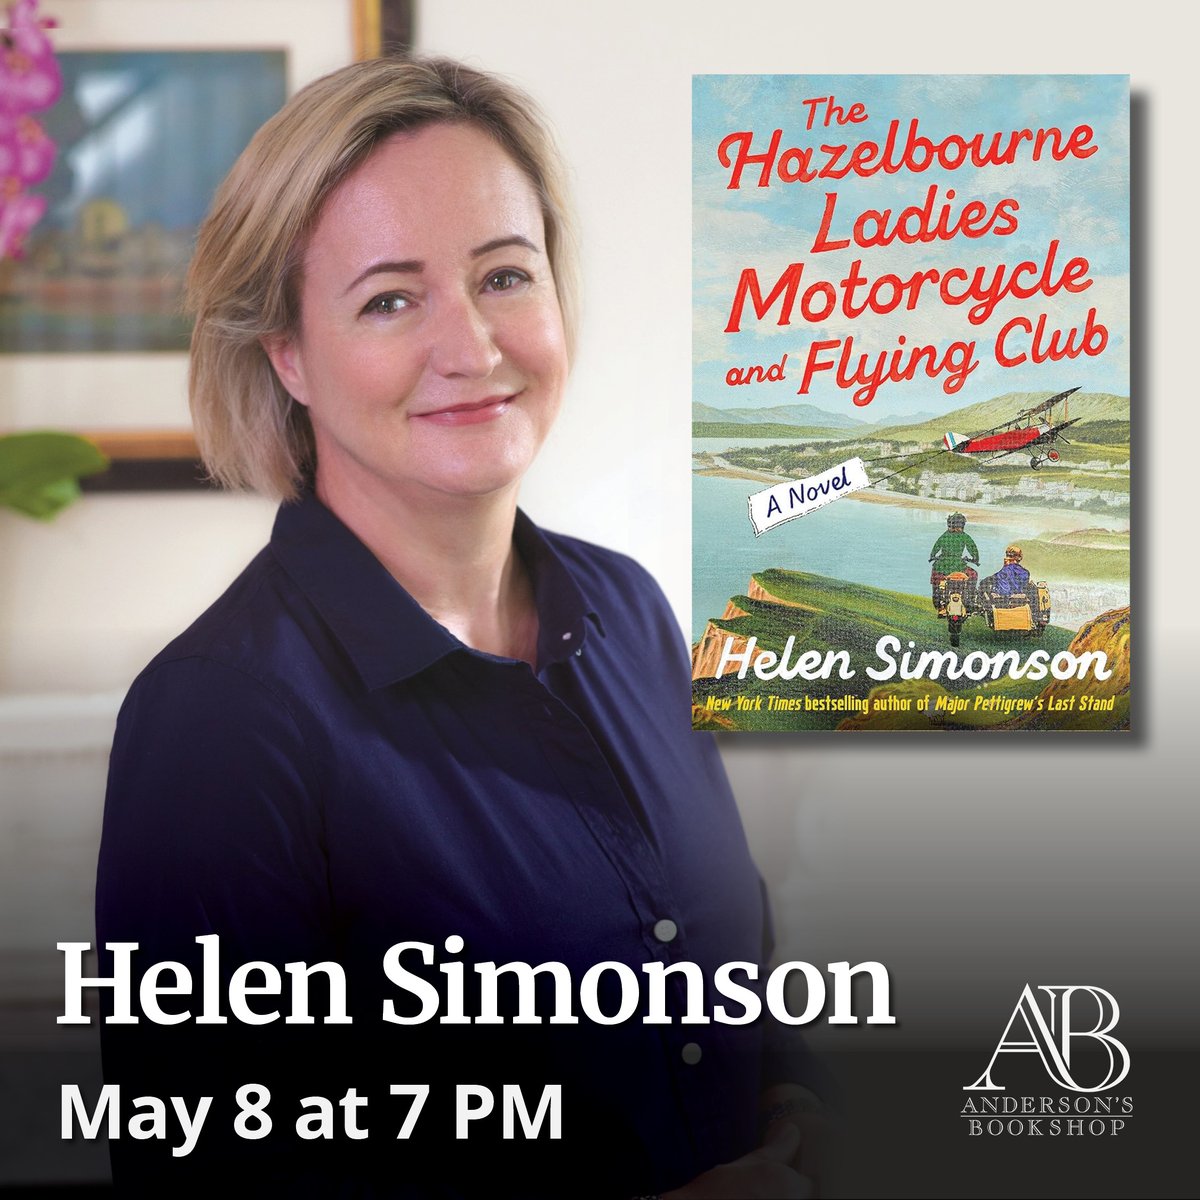 May 8th: Join us in welcoming Helen Simonson @Simonsonhelen to Anderson's! Helen will give a presentation, take Q&A, and have a signing/photo line! TICKETS: HelenSimonsonAndersons.eventcombo.com